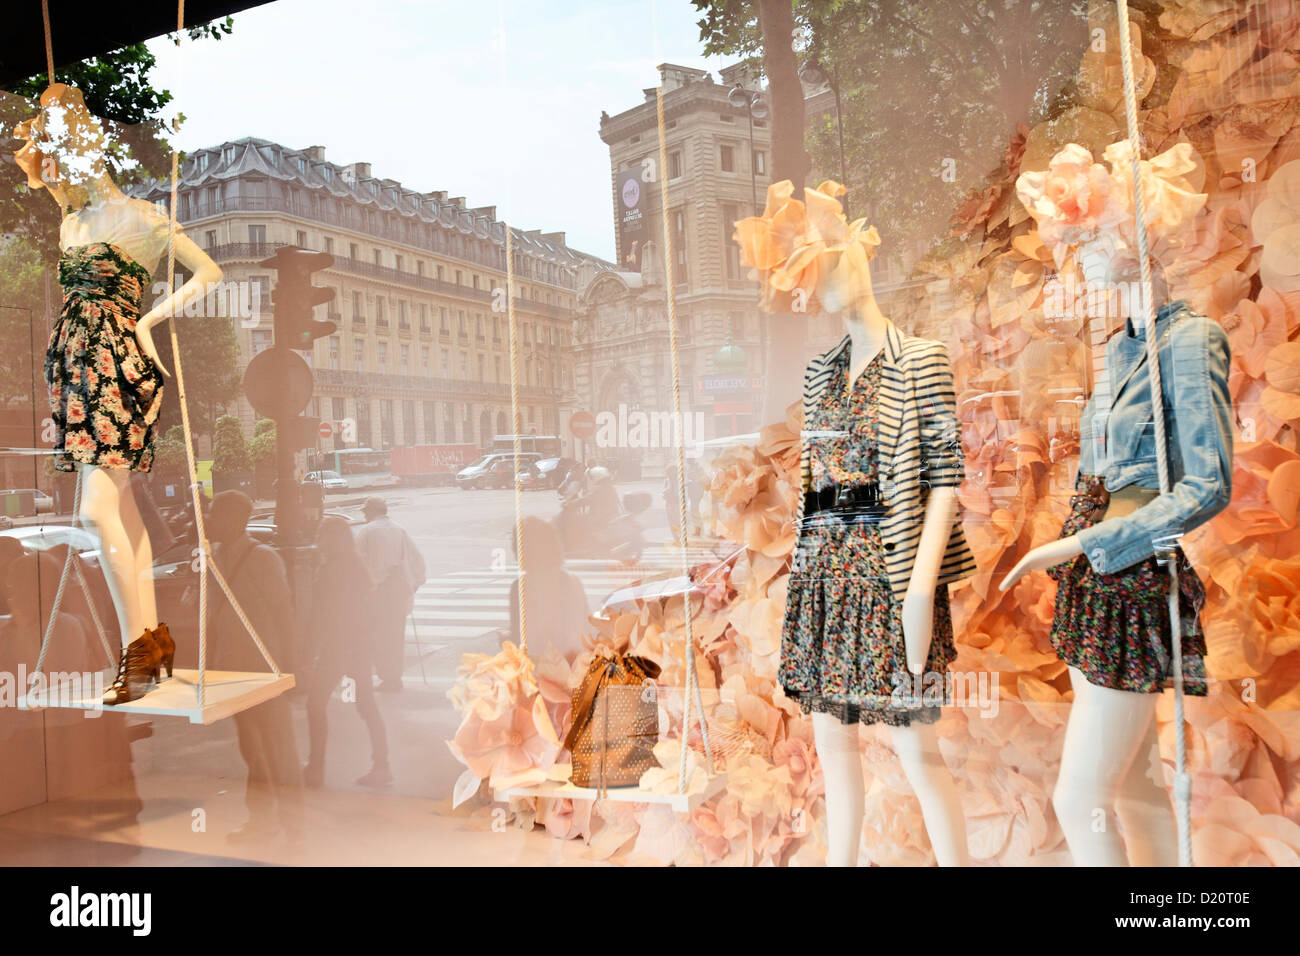 Display window of the department store Galeries Lafayette, Paris, France, Europe Stock Photo